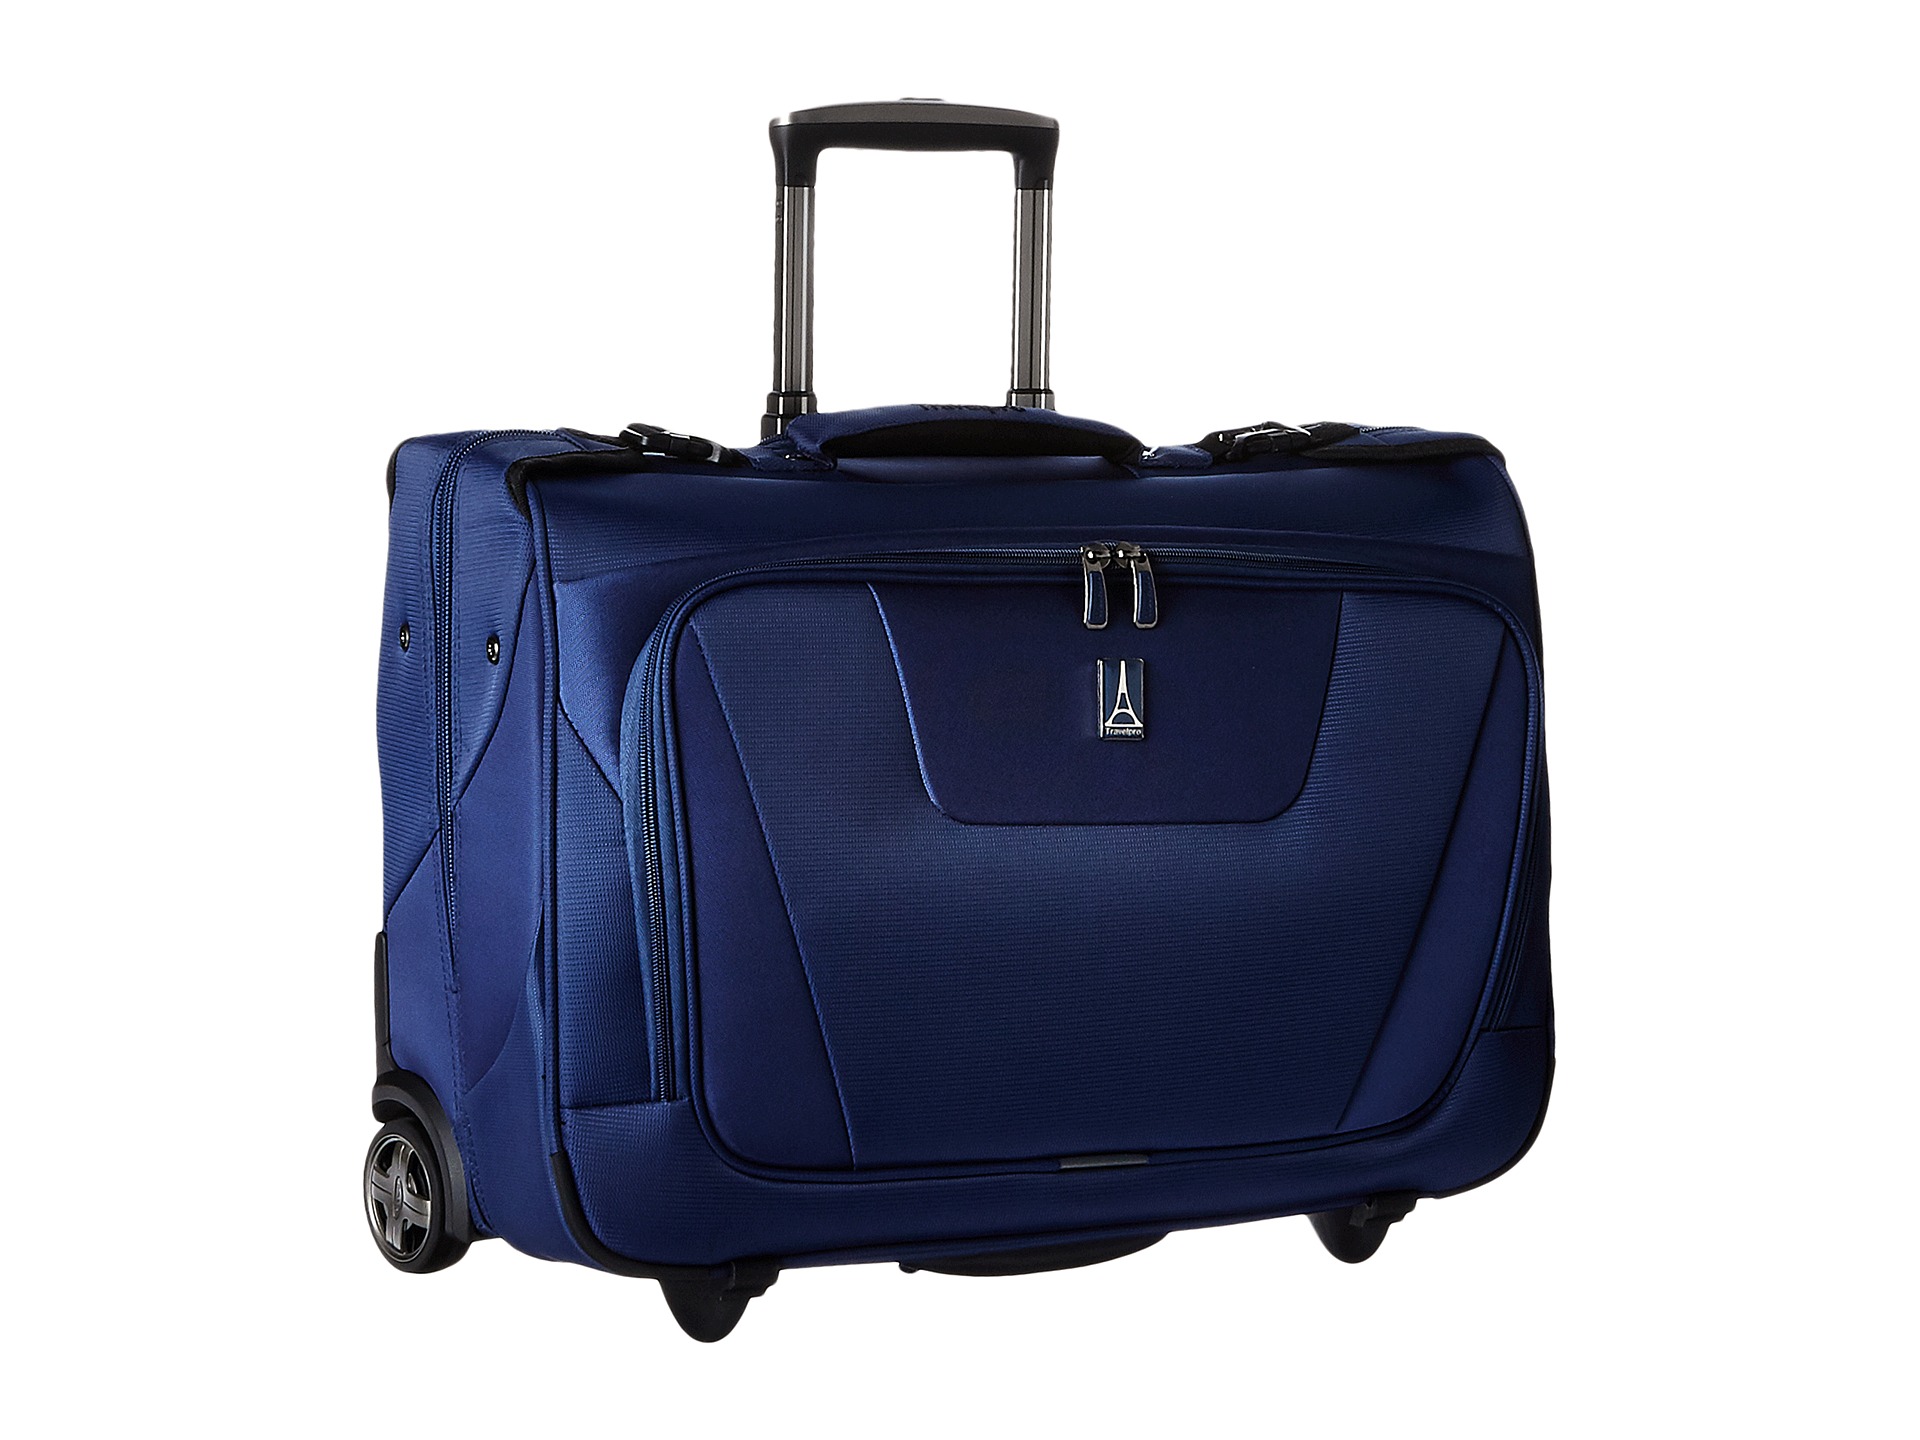 Travelpro Maxlite® 4 - Rolling Carry-On Garment Bag at 0